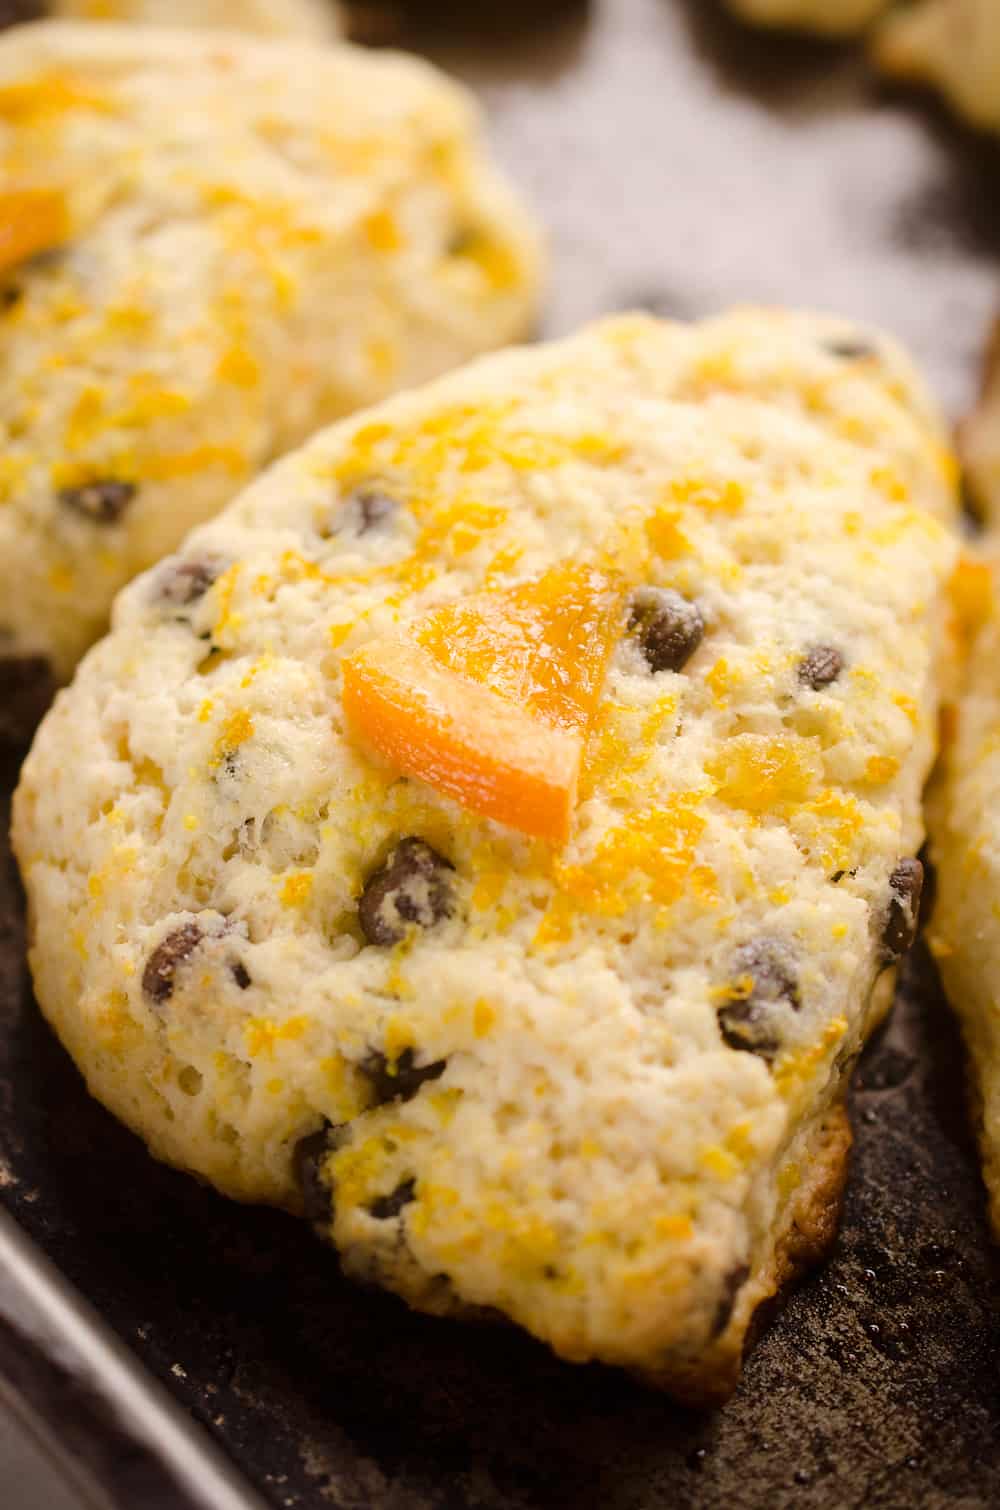 Dark Chocolate & Orange Scones are soft and tender cake-like treats with a bright citrus flavor paired with rich dark chocolate. Serve them for breakfast, brunch or dessert, they are sure to be a hit!